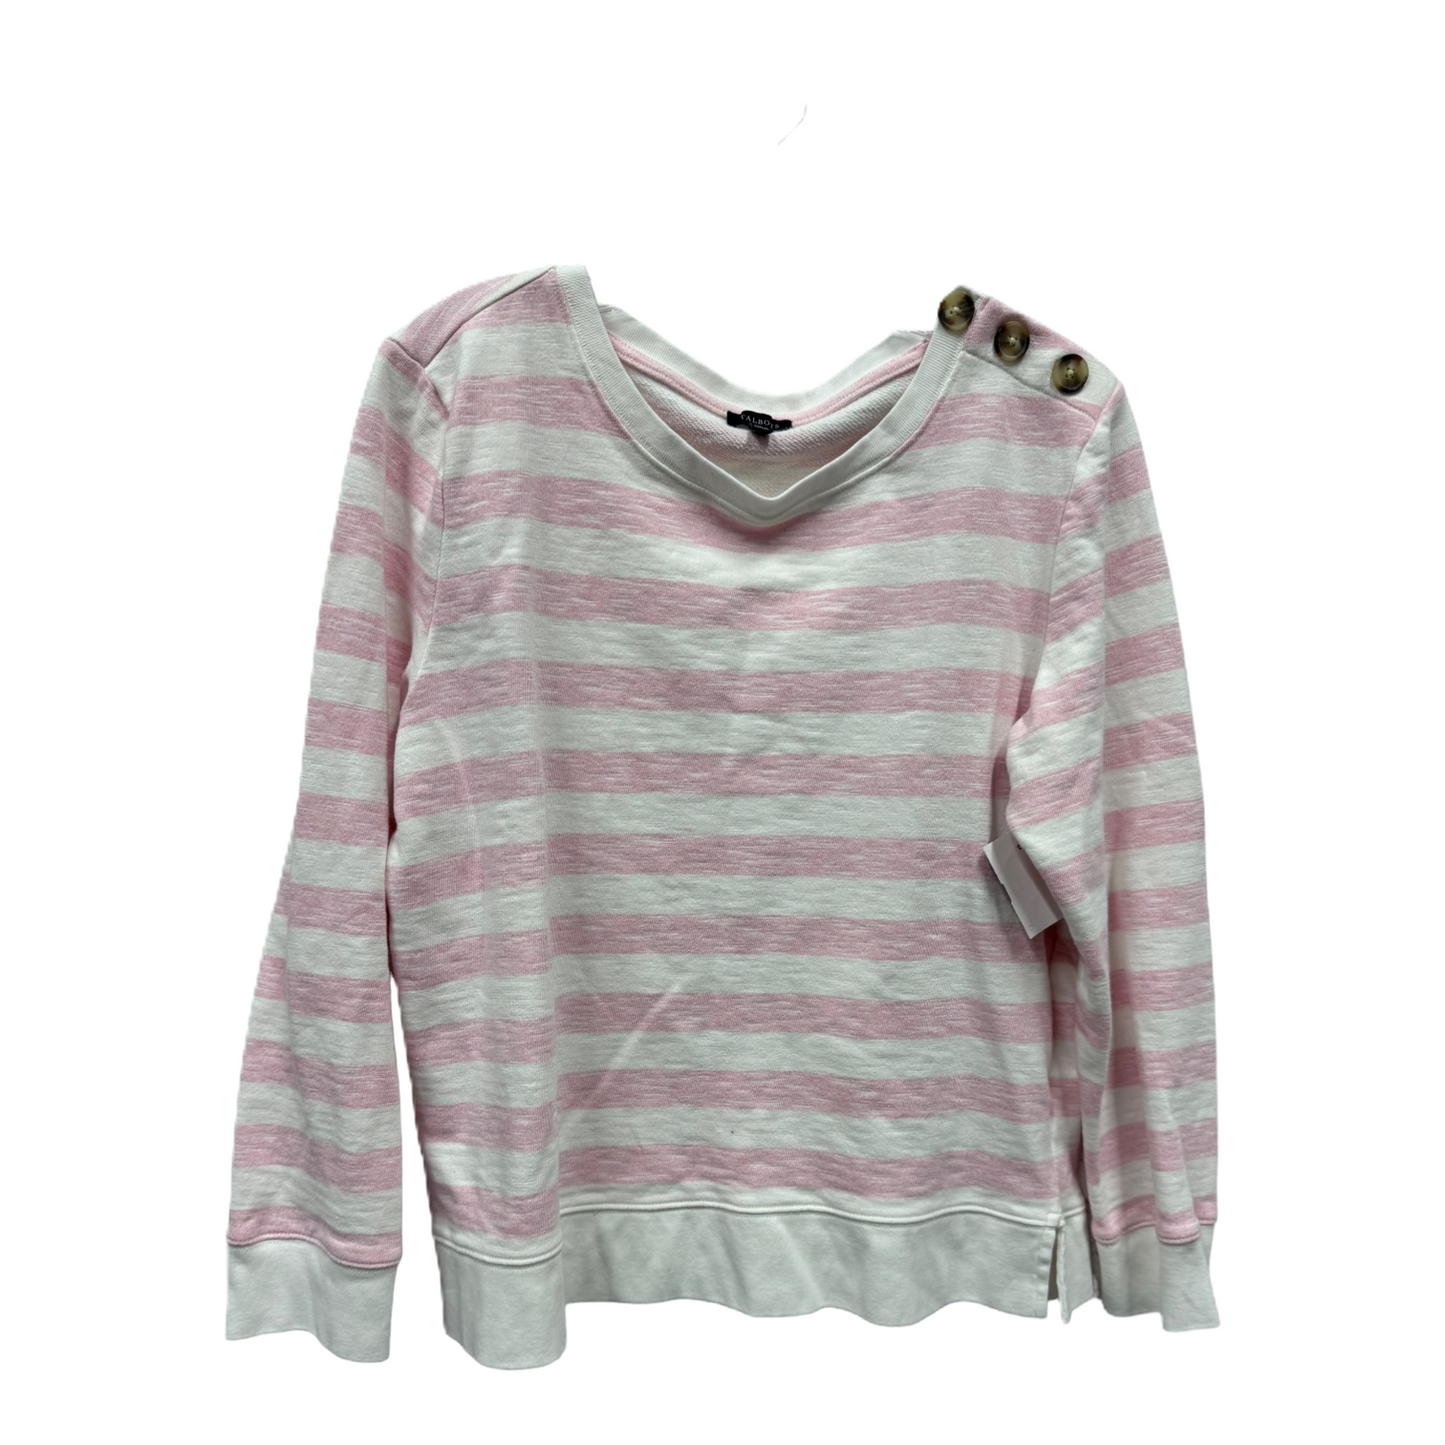 Pink Top Long Sleeve By Talbots, Size: L